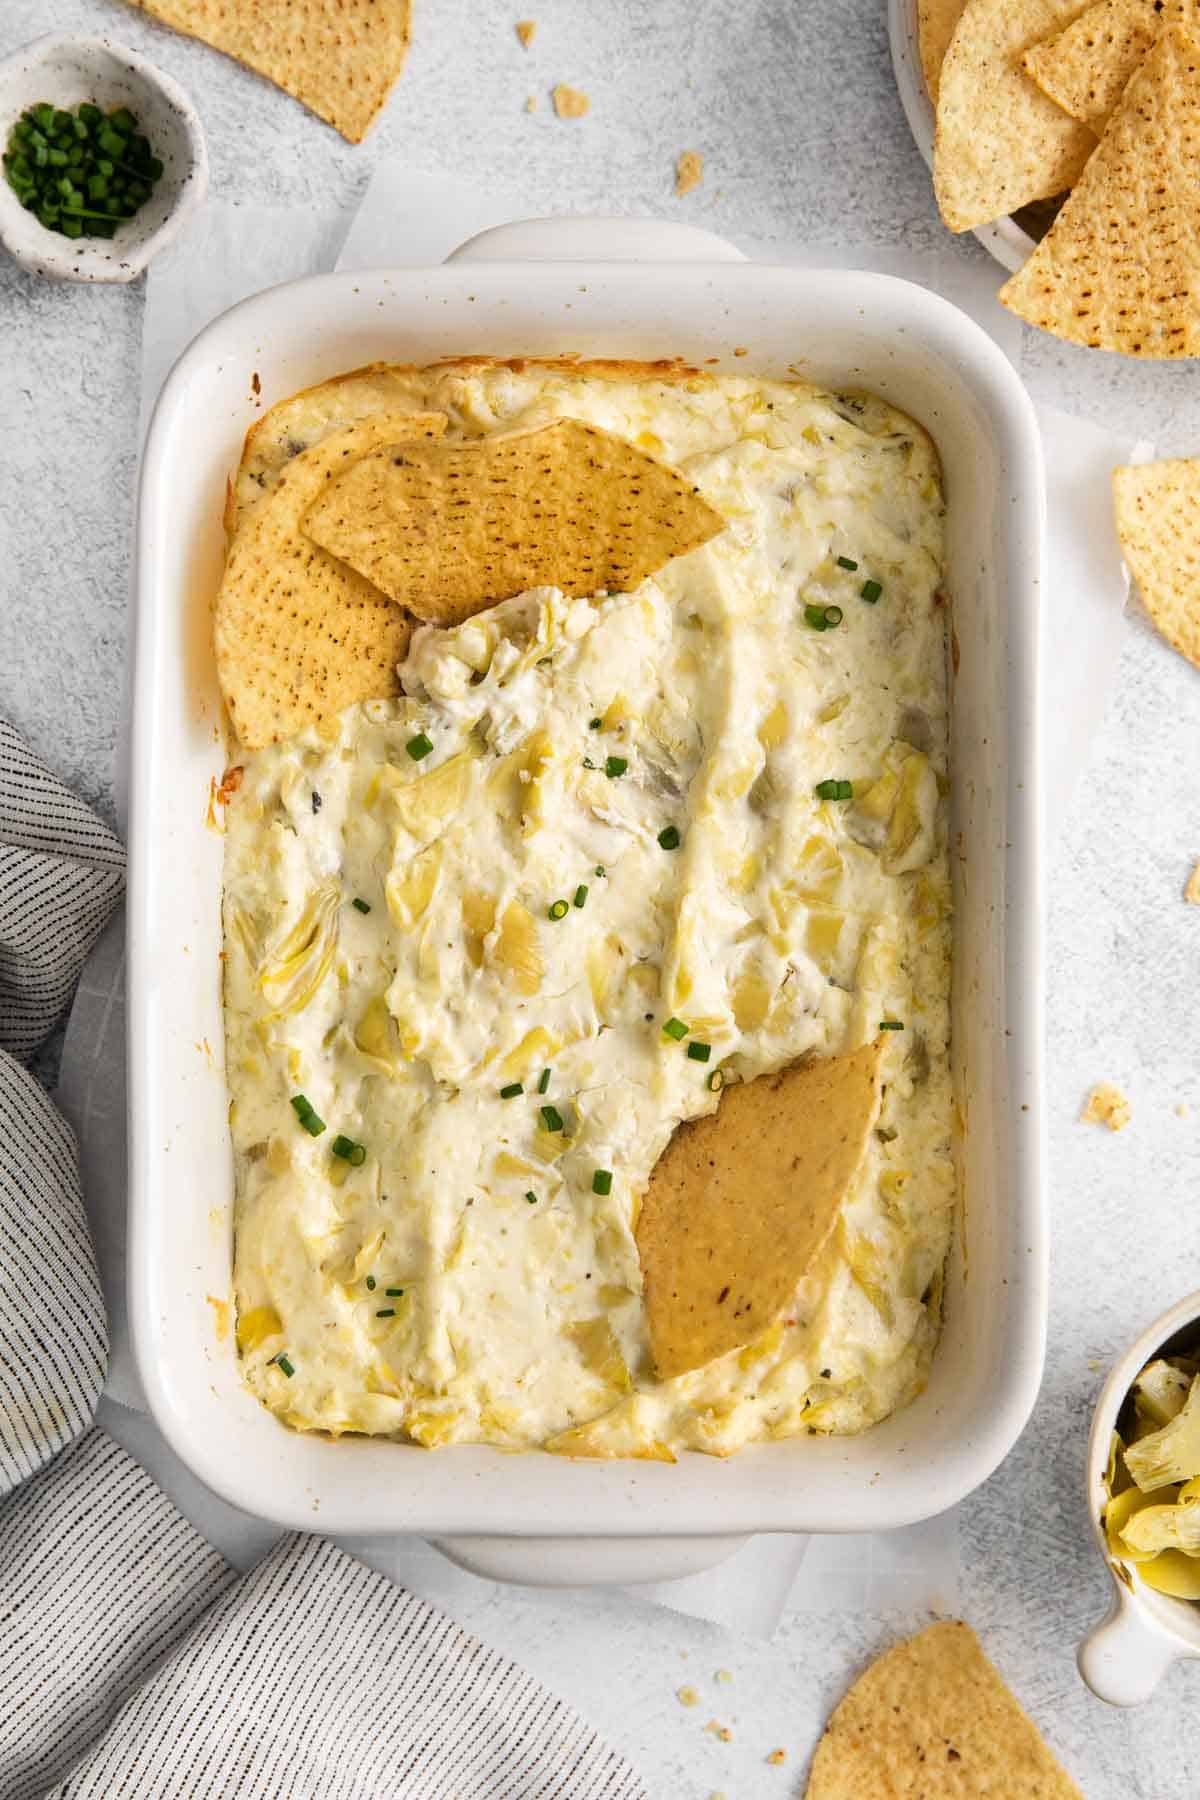 Artichoke dip in a baking dish, with chips in the dip